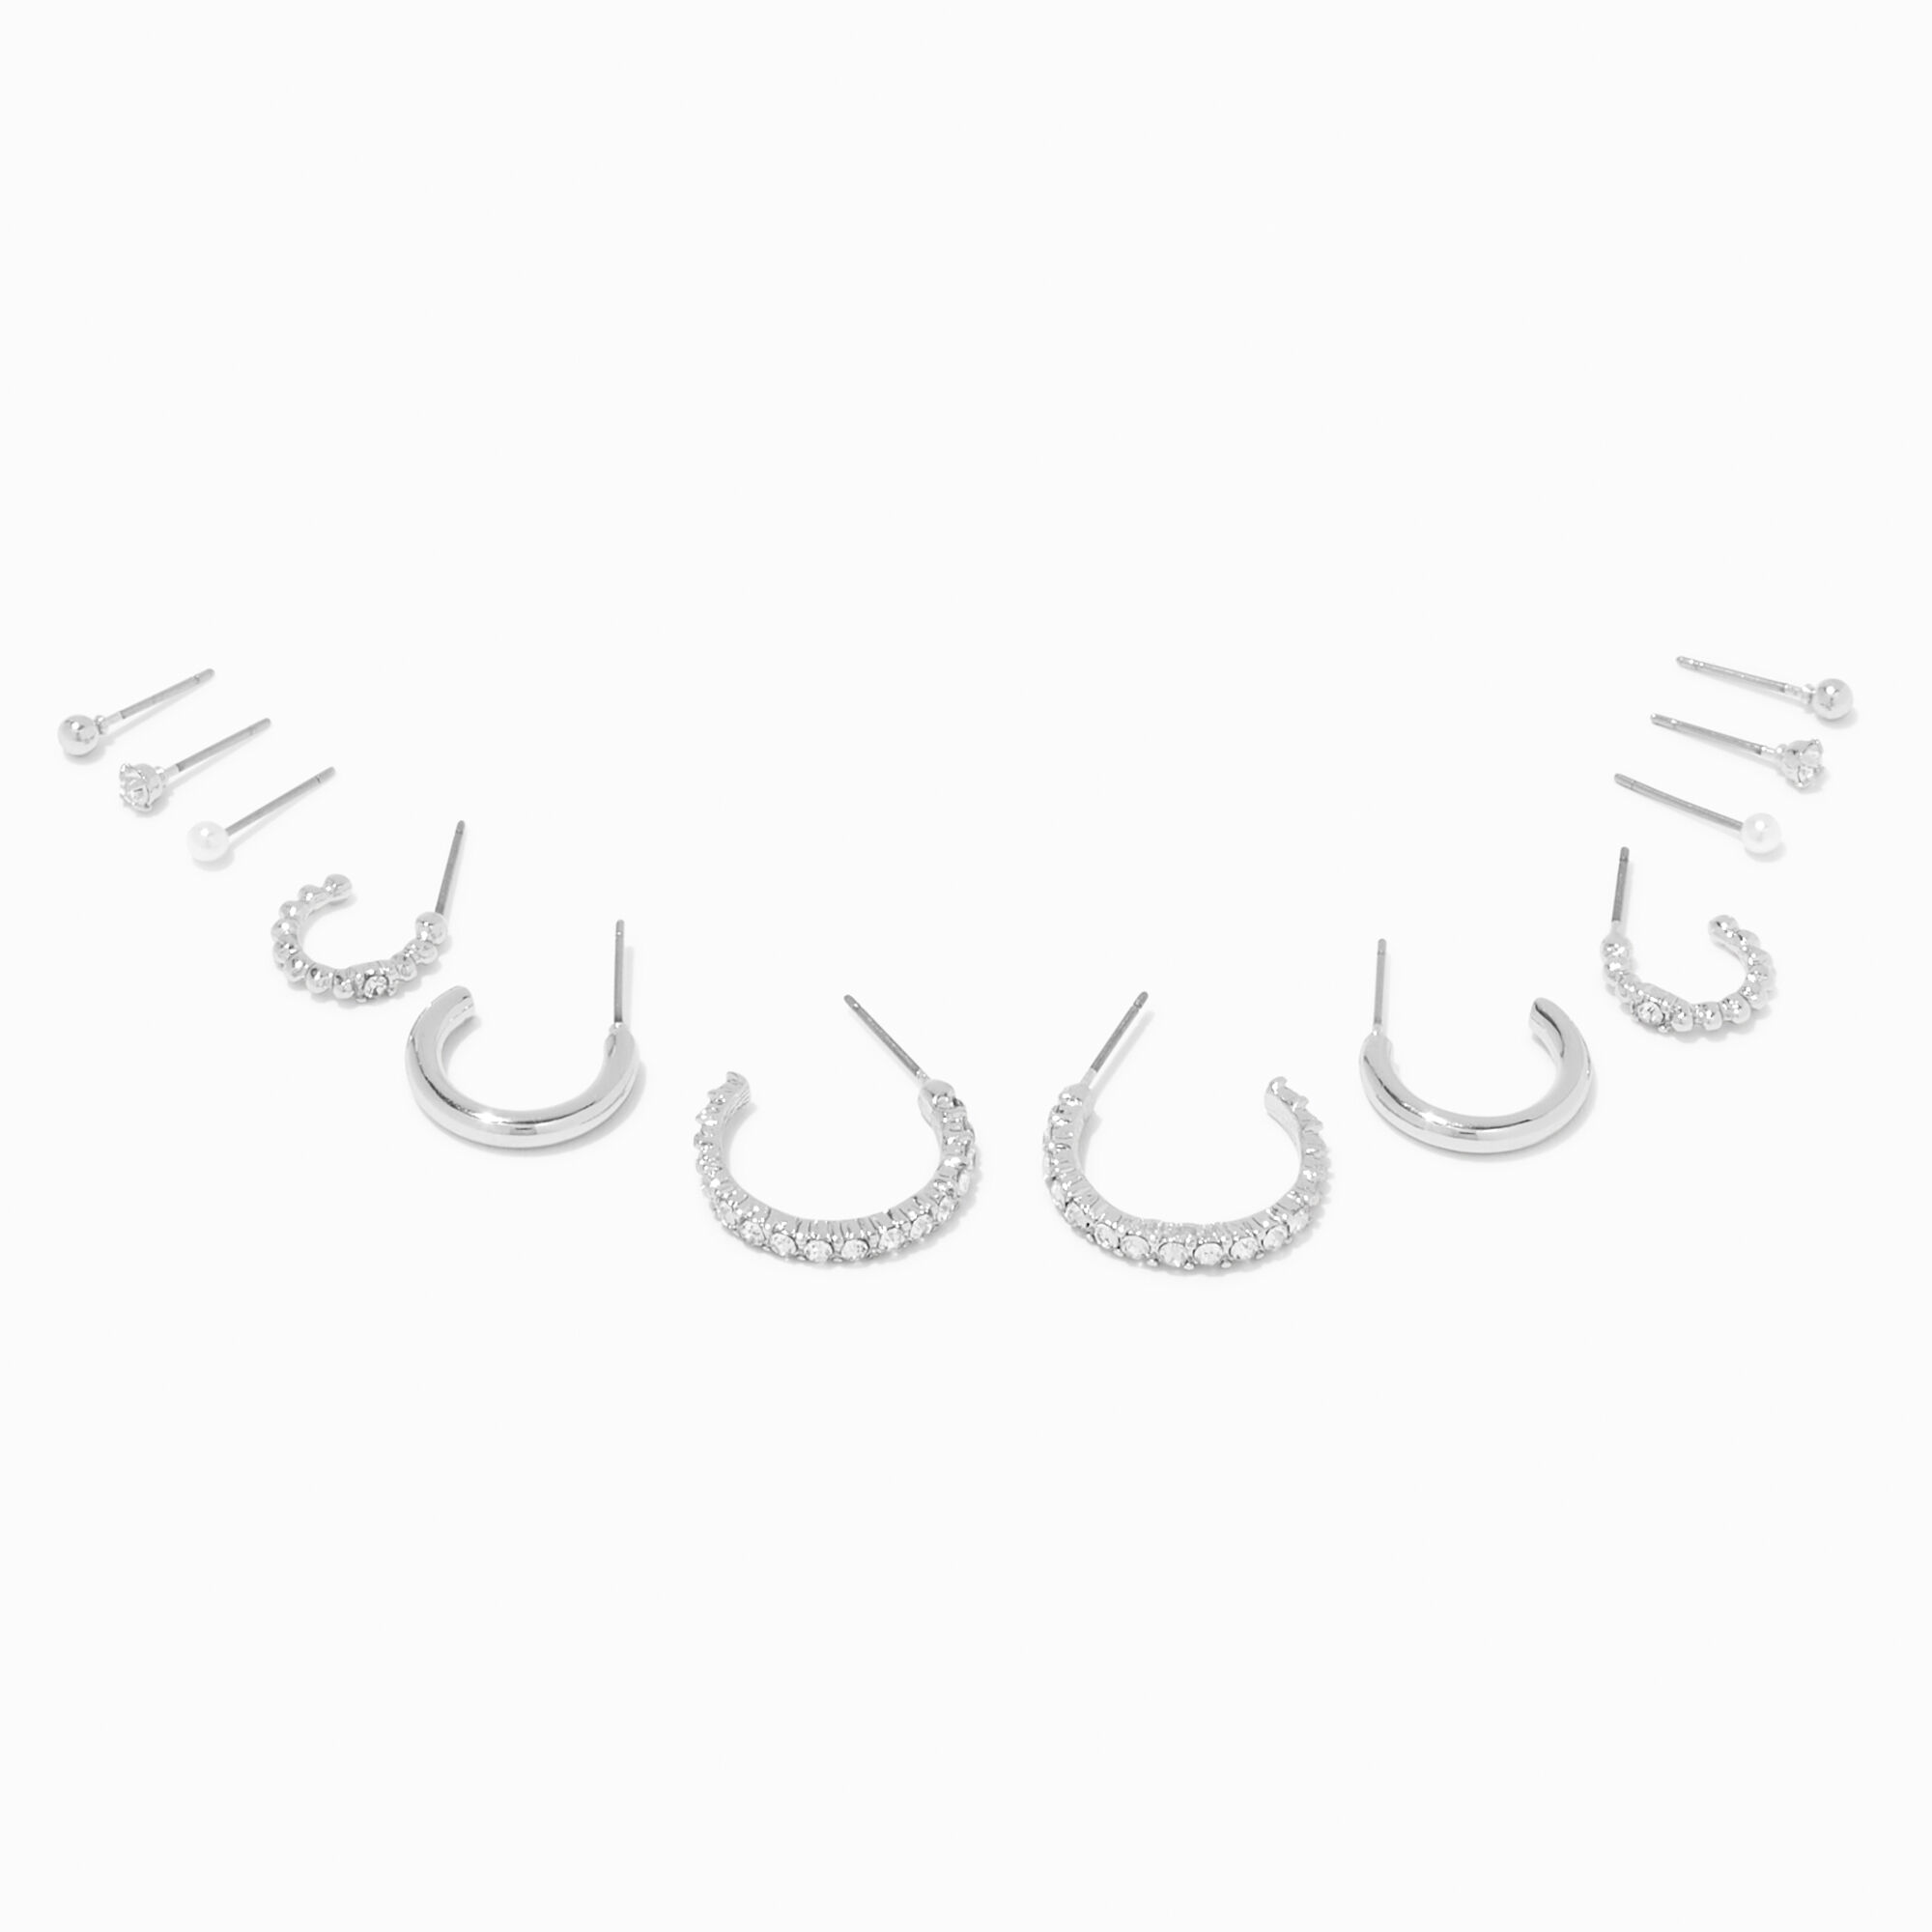 View Claires Tone 15MM Crystal Hoop Earrings Stackables Set 6 Pack Silver information